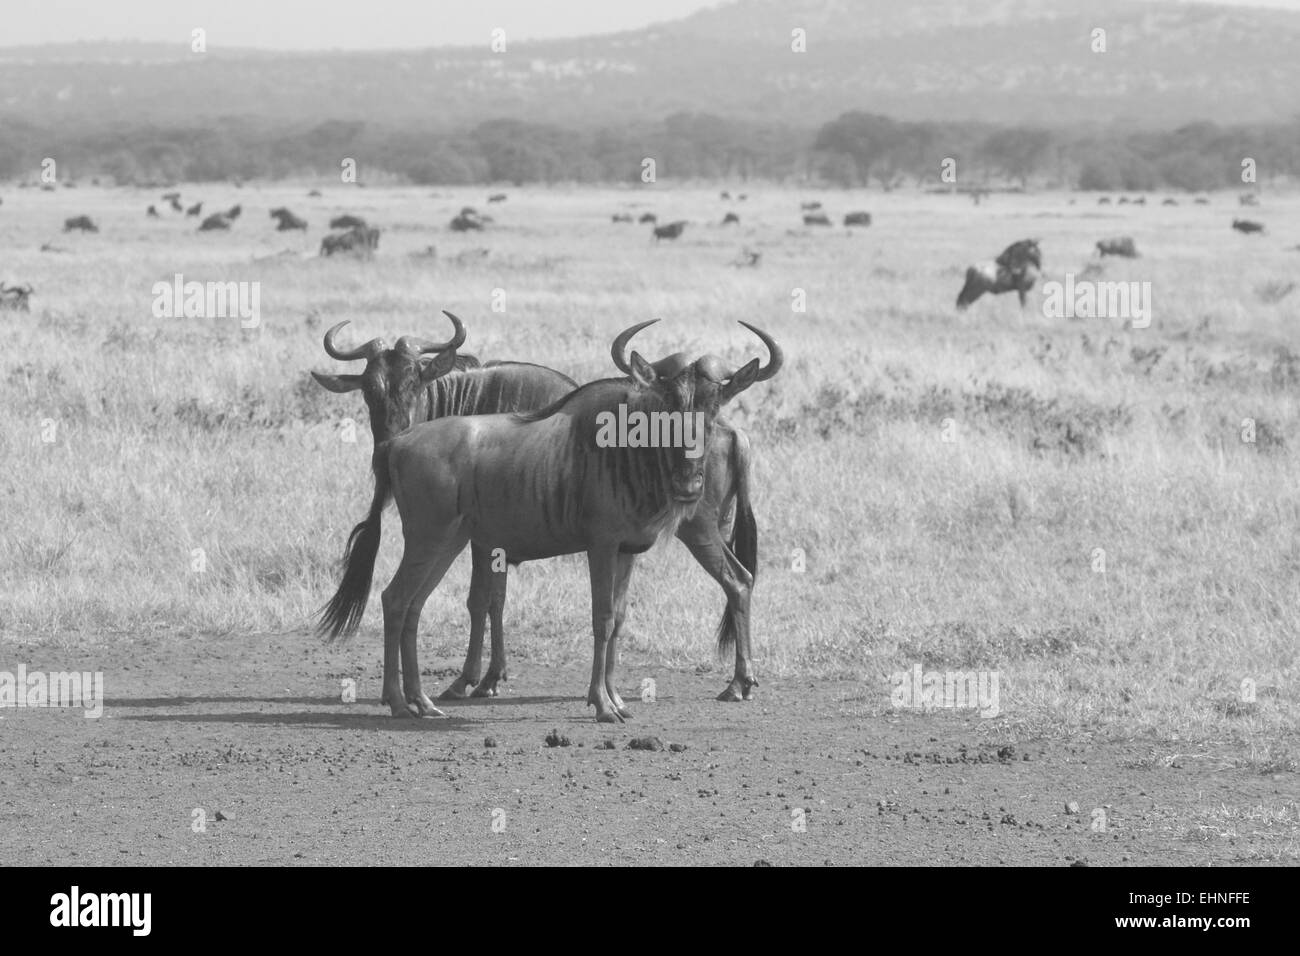 Two blue wildebeests, Connochaetes taurinus, standing in the savannah ...